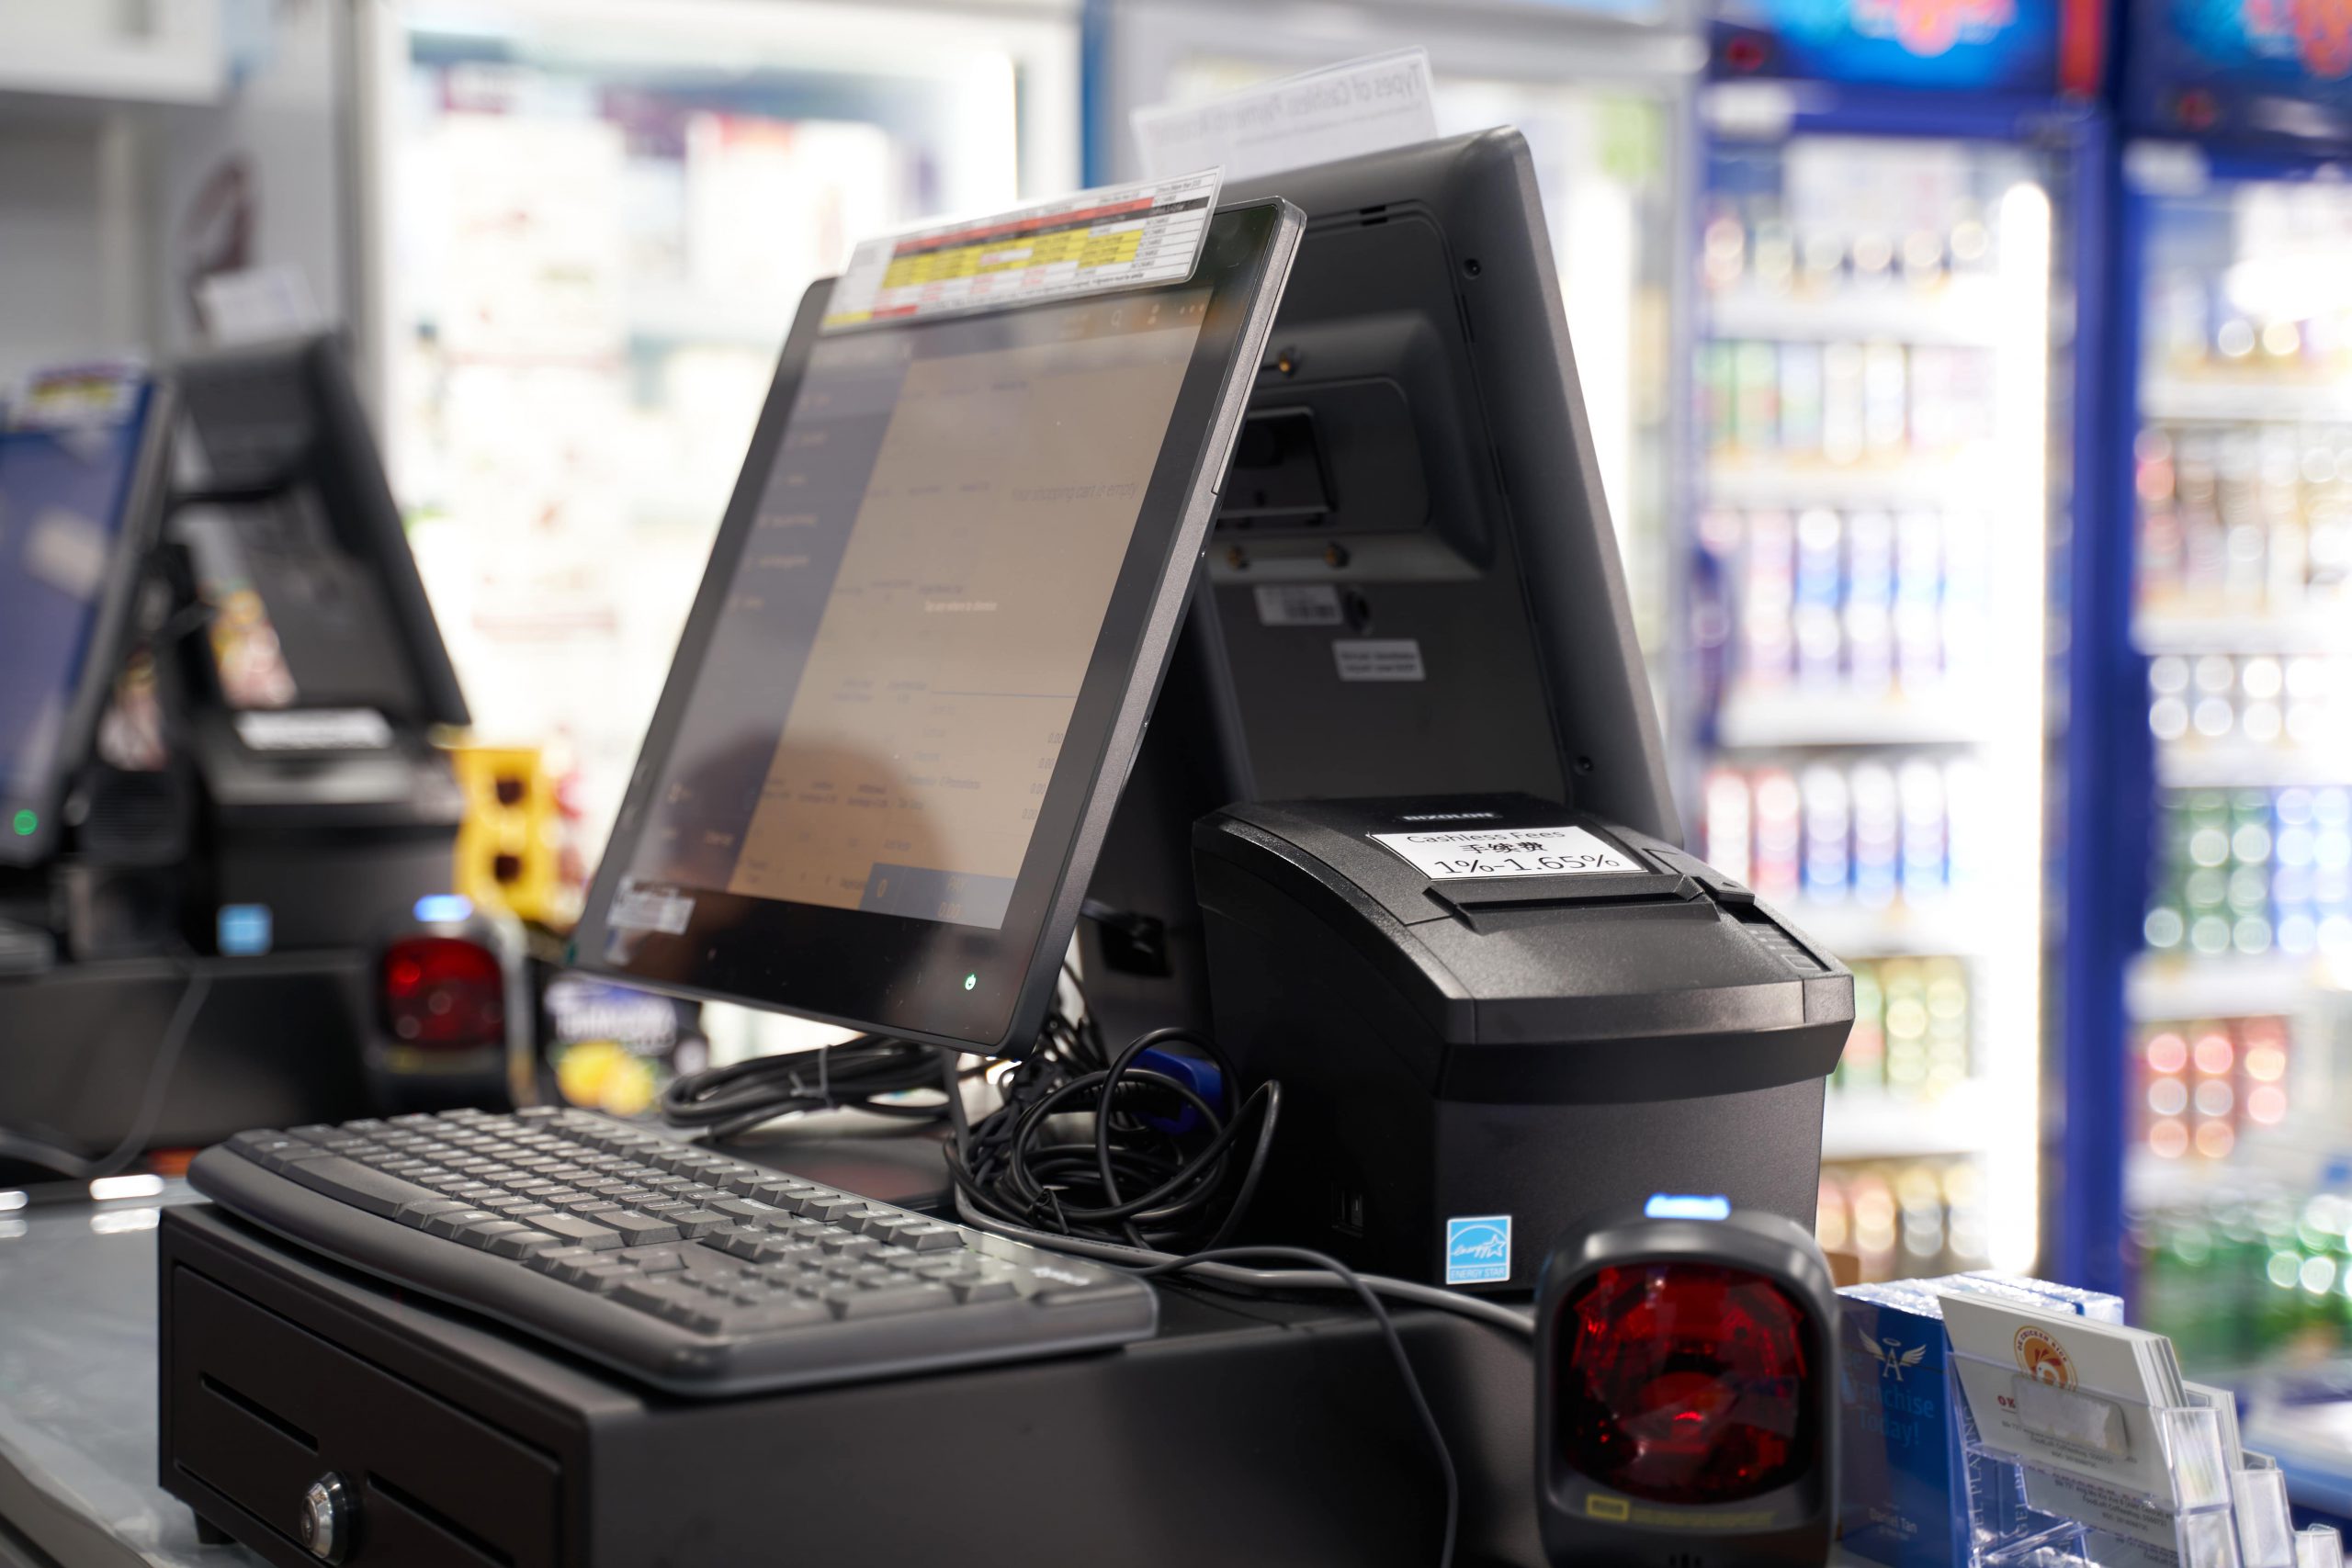 Buying The Perfect Retail POS System